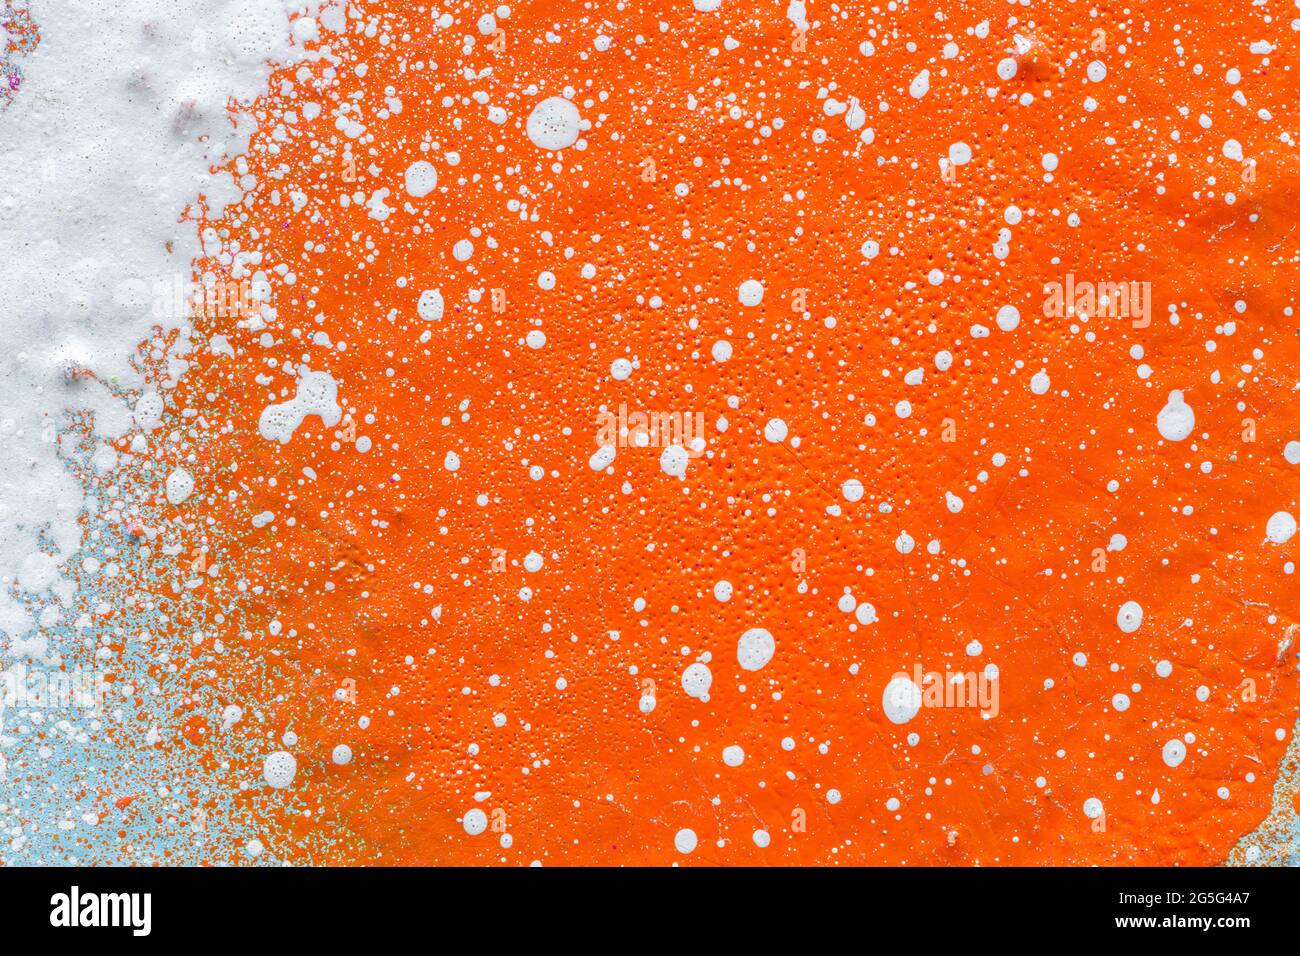 Macro close-up of a orange spray paint with white splashes. Abstract full frame textured splattered graffiti background with copy space. Stock Photo